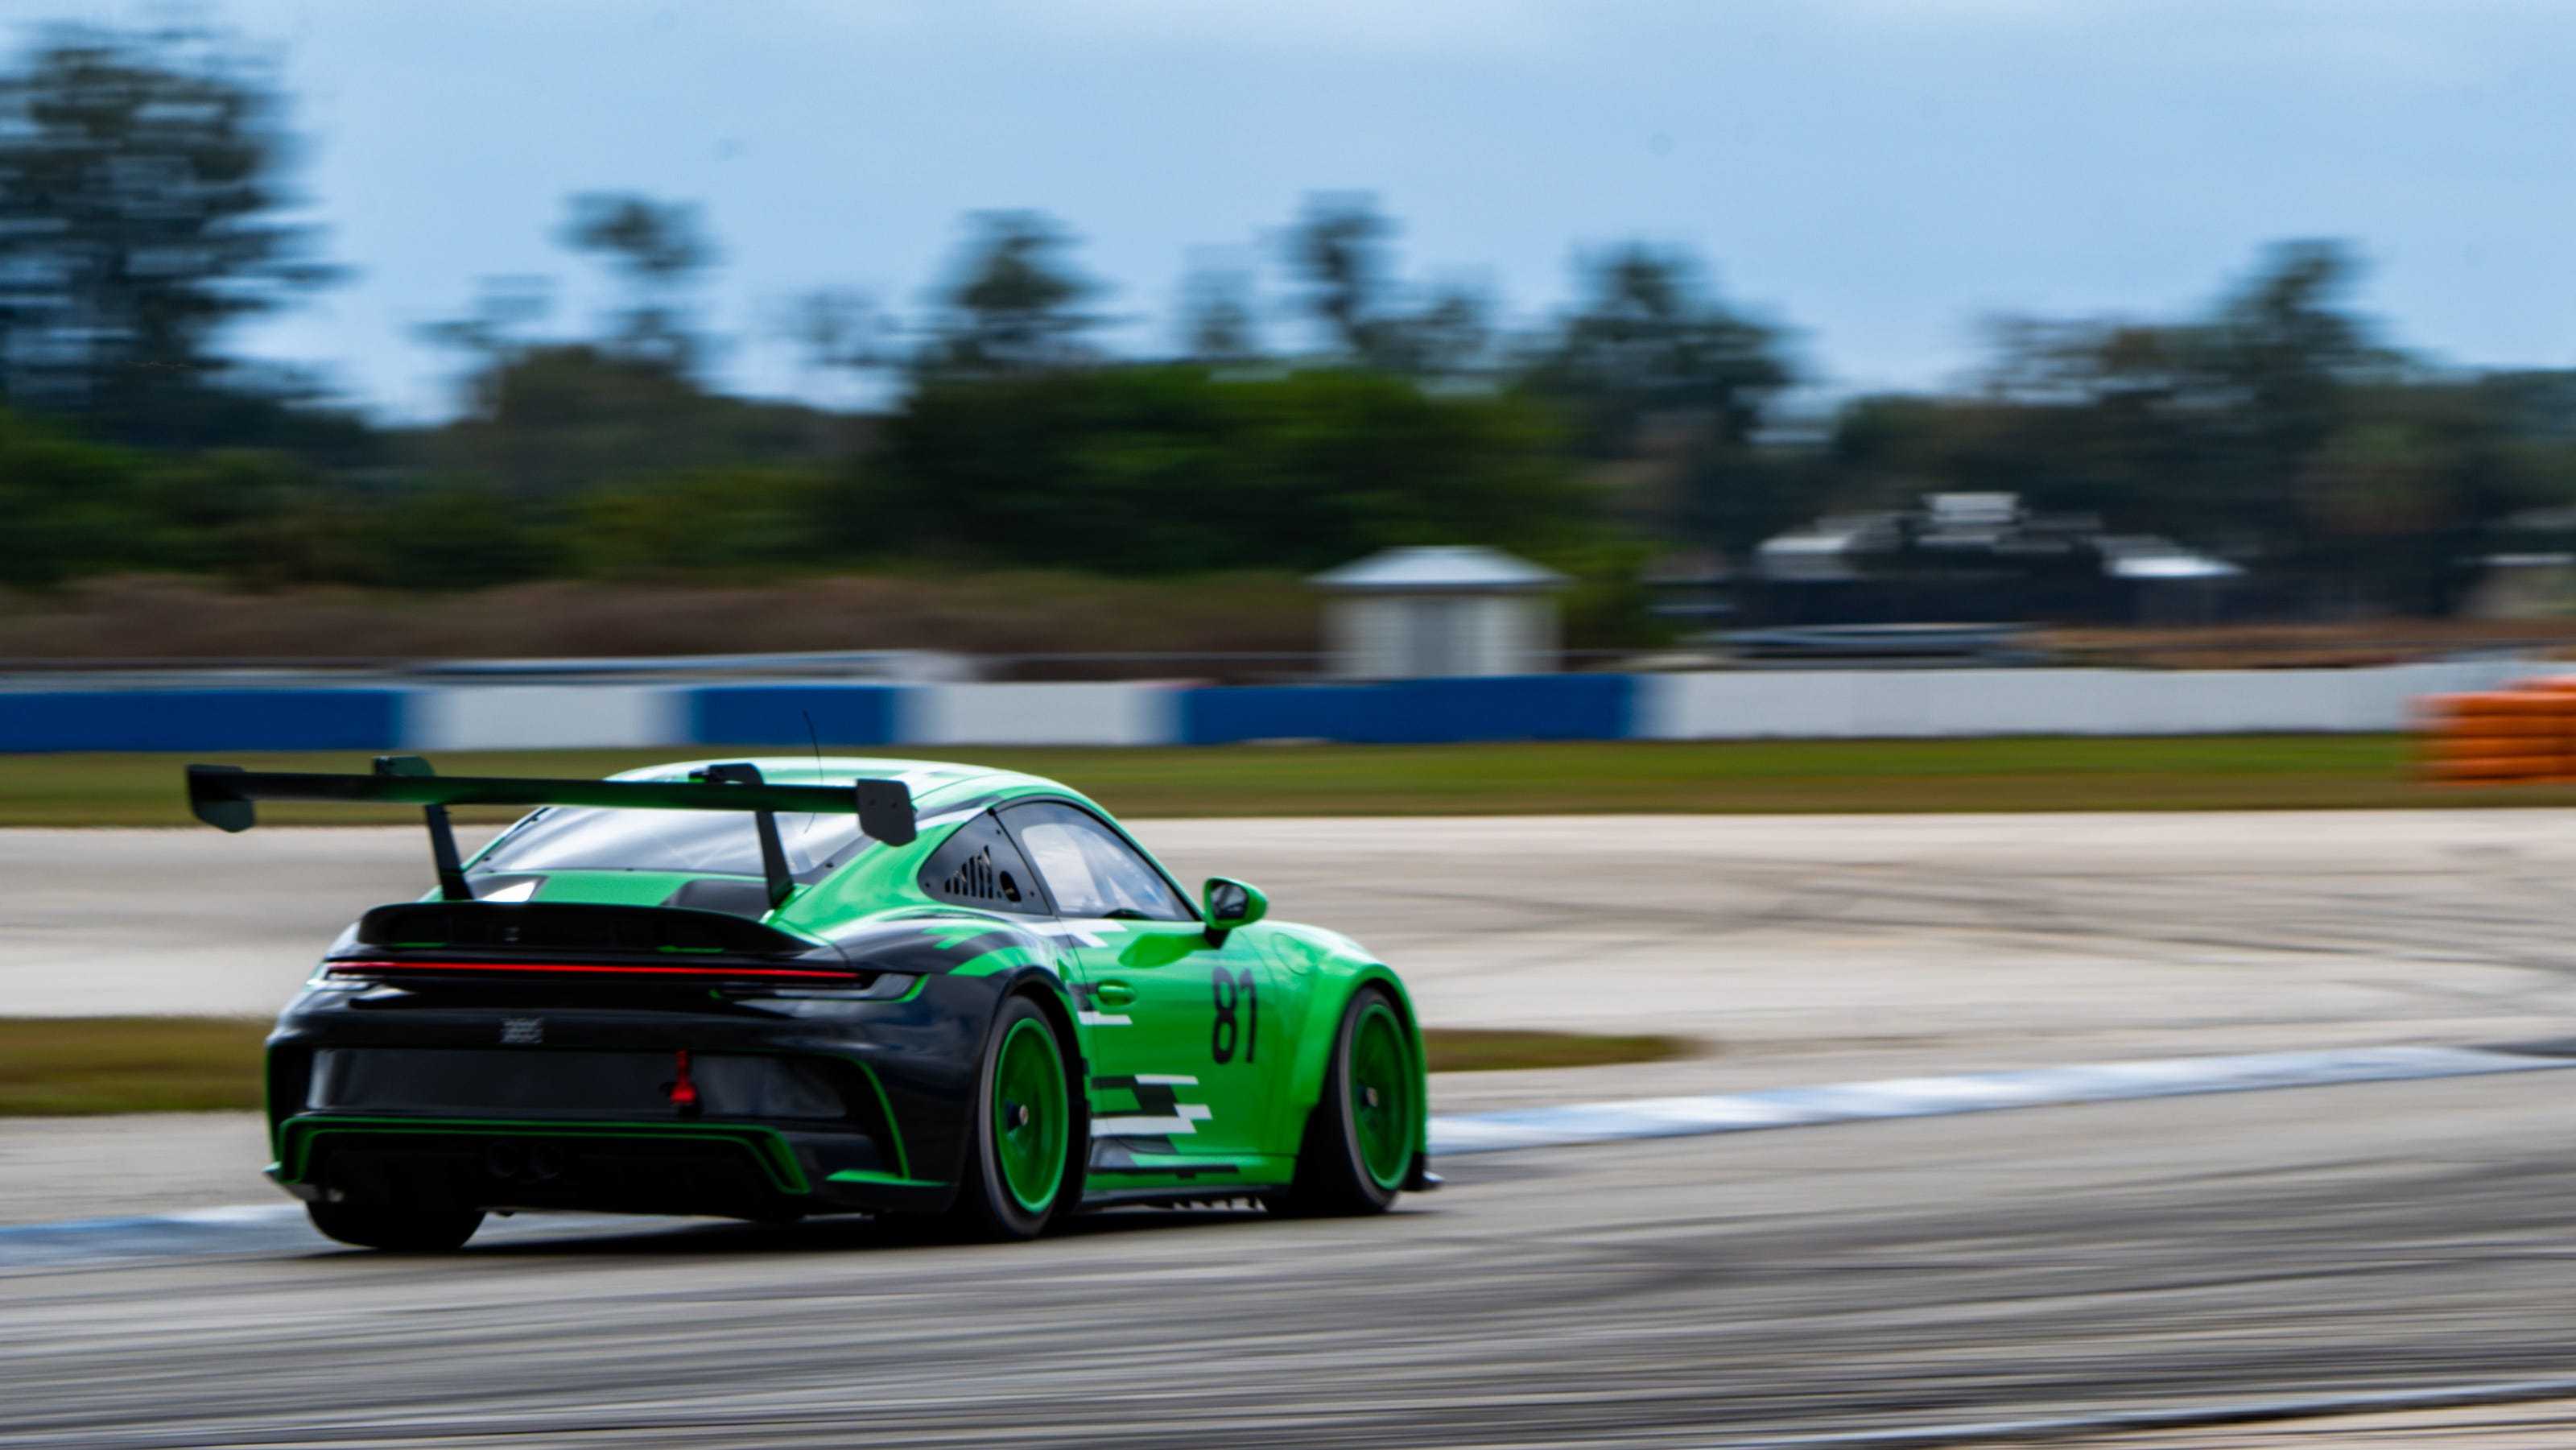 In his first year of pro racing Sarasota's Grant Talkie dominates IMSA